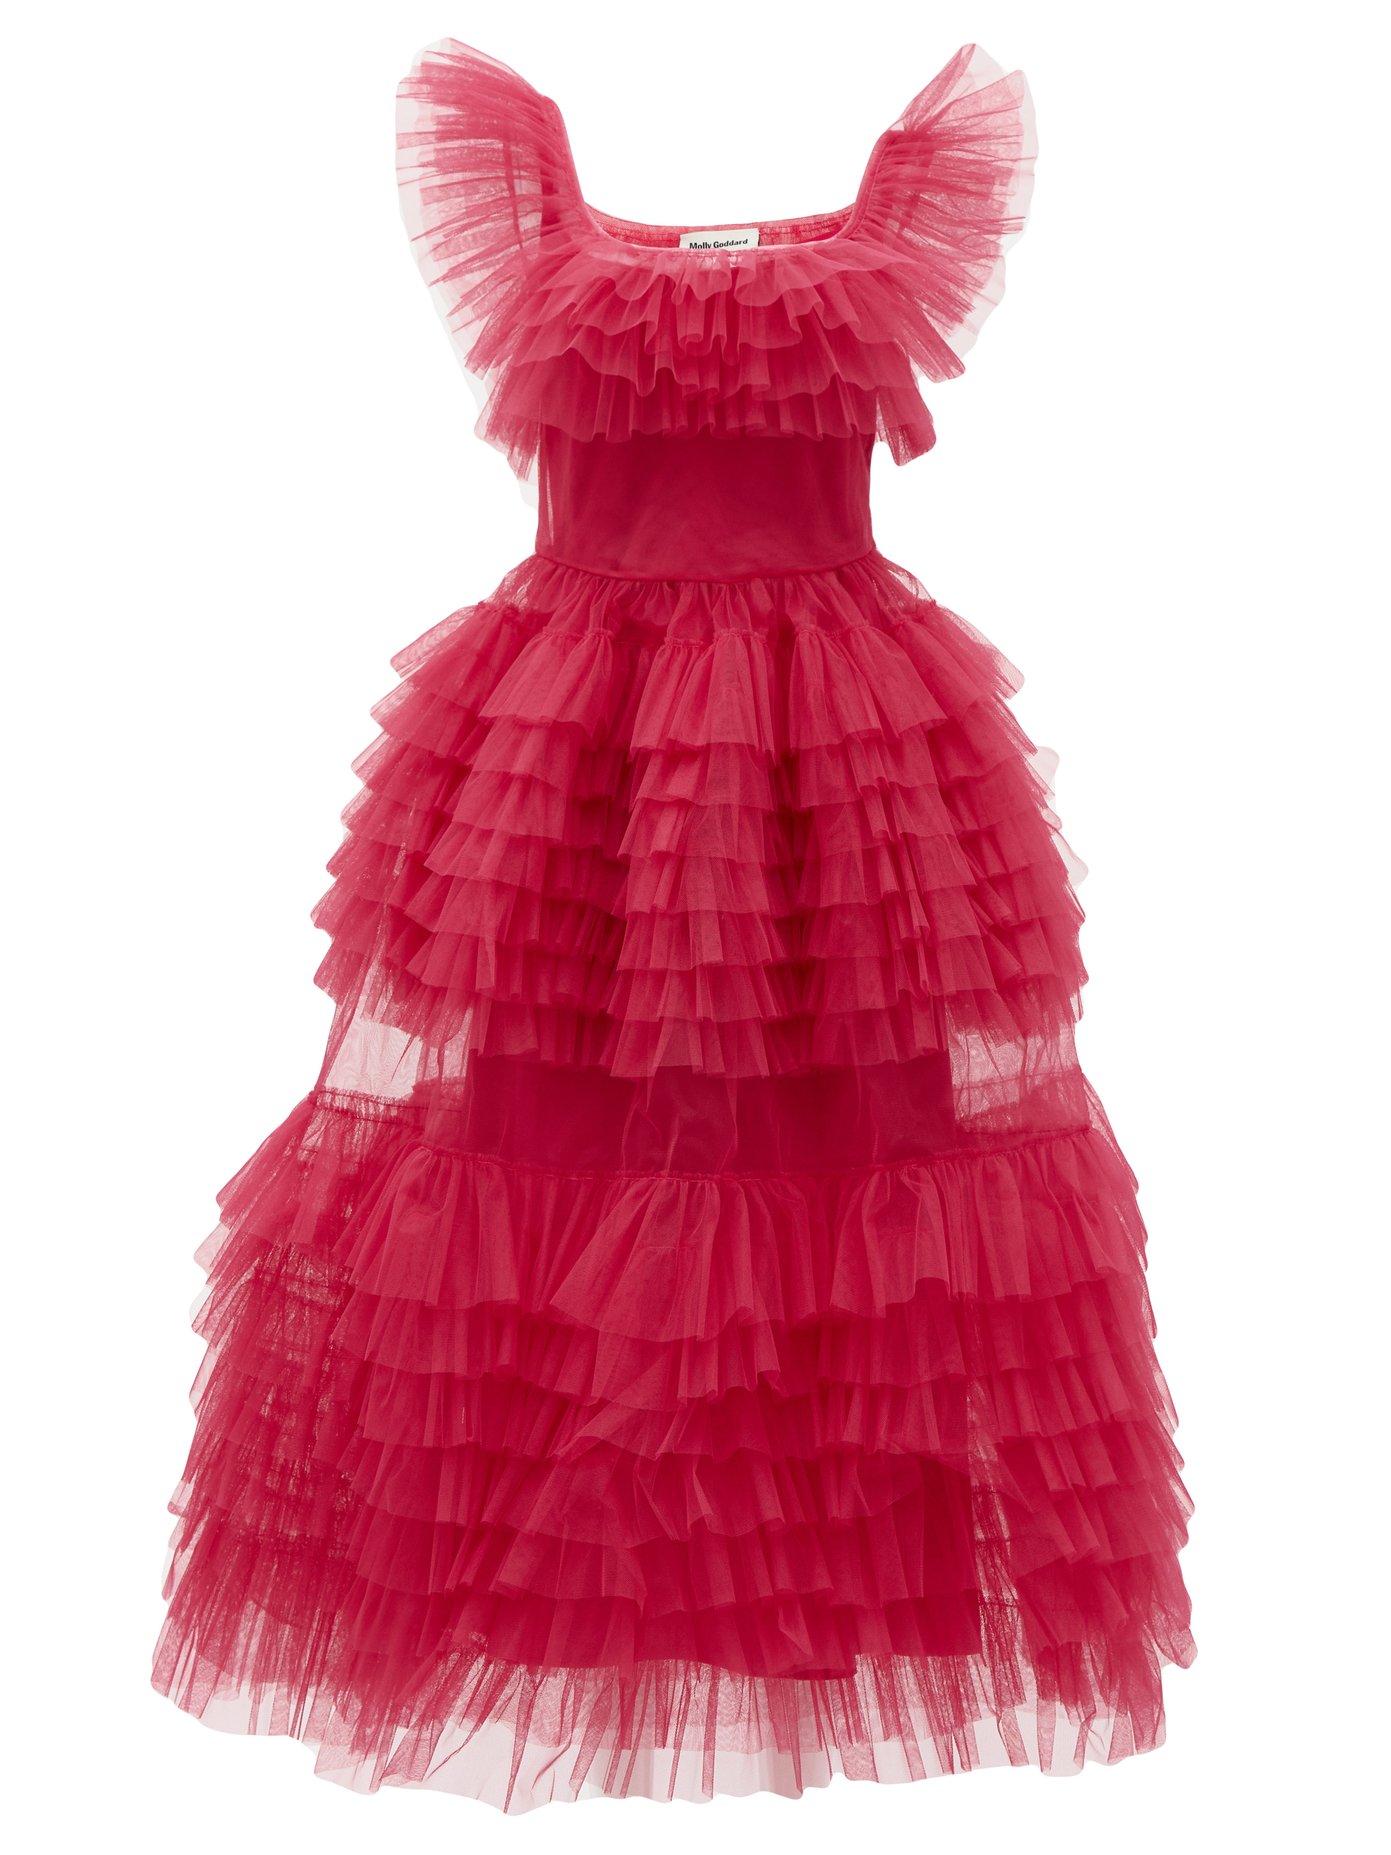 molly goddard pink tulle dress